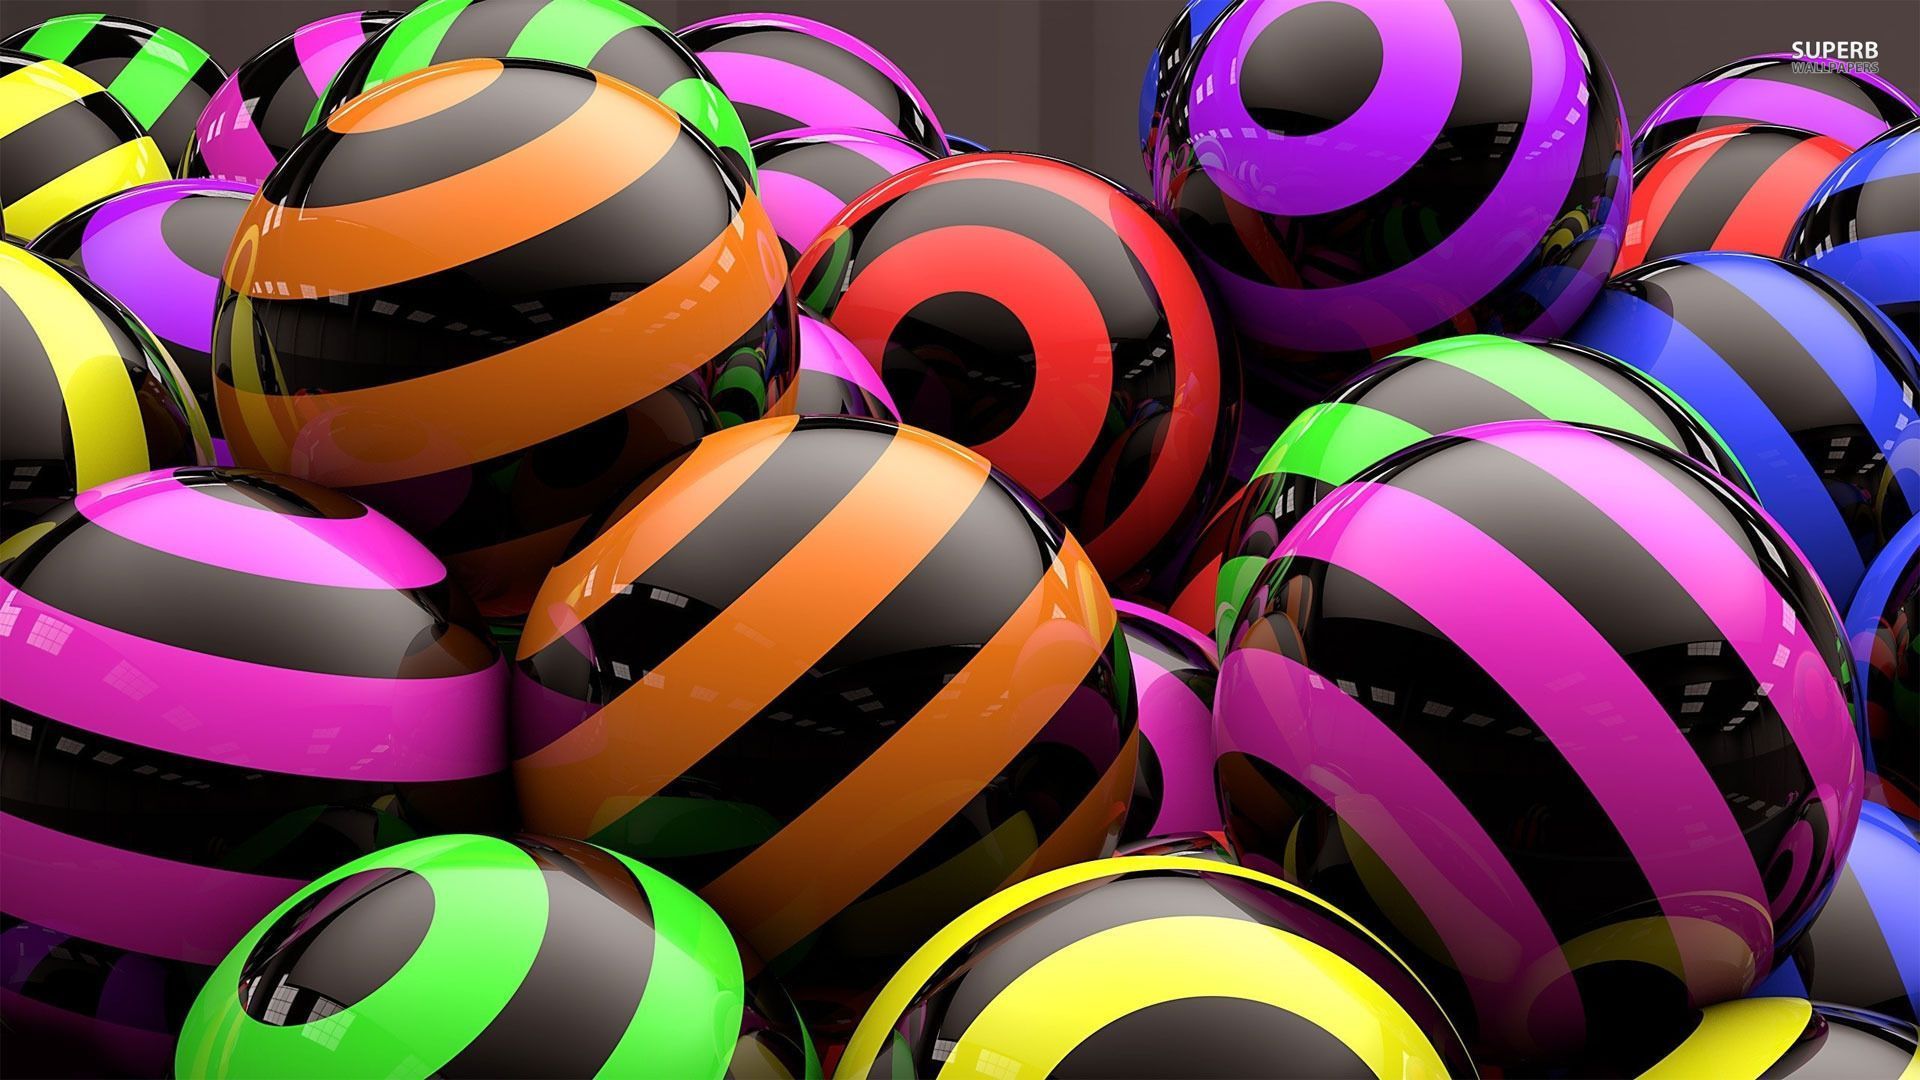 Striped colorful spheres wallpaper - 3D wallpapers - #18521